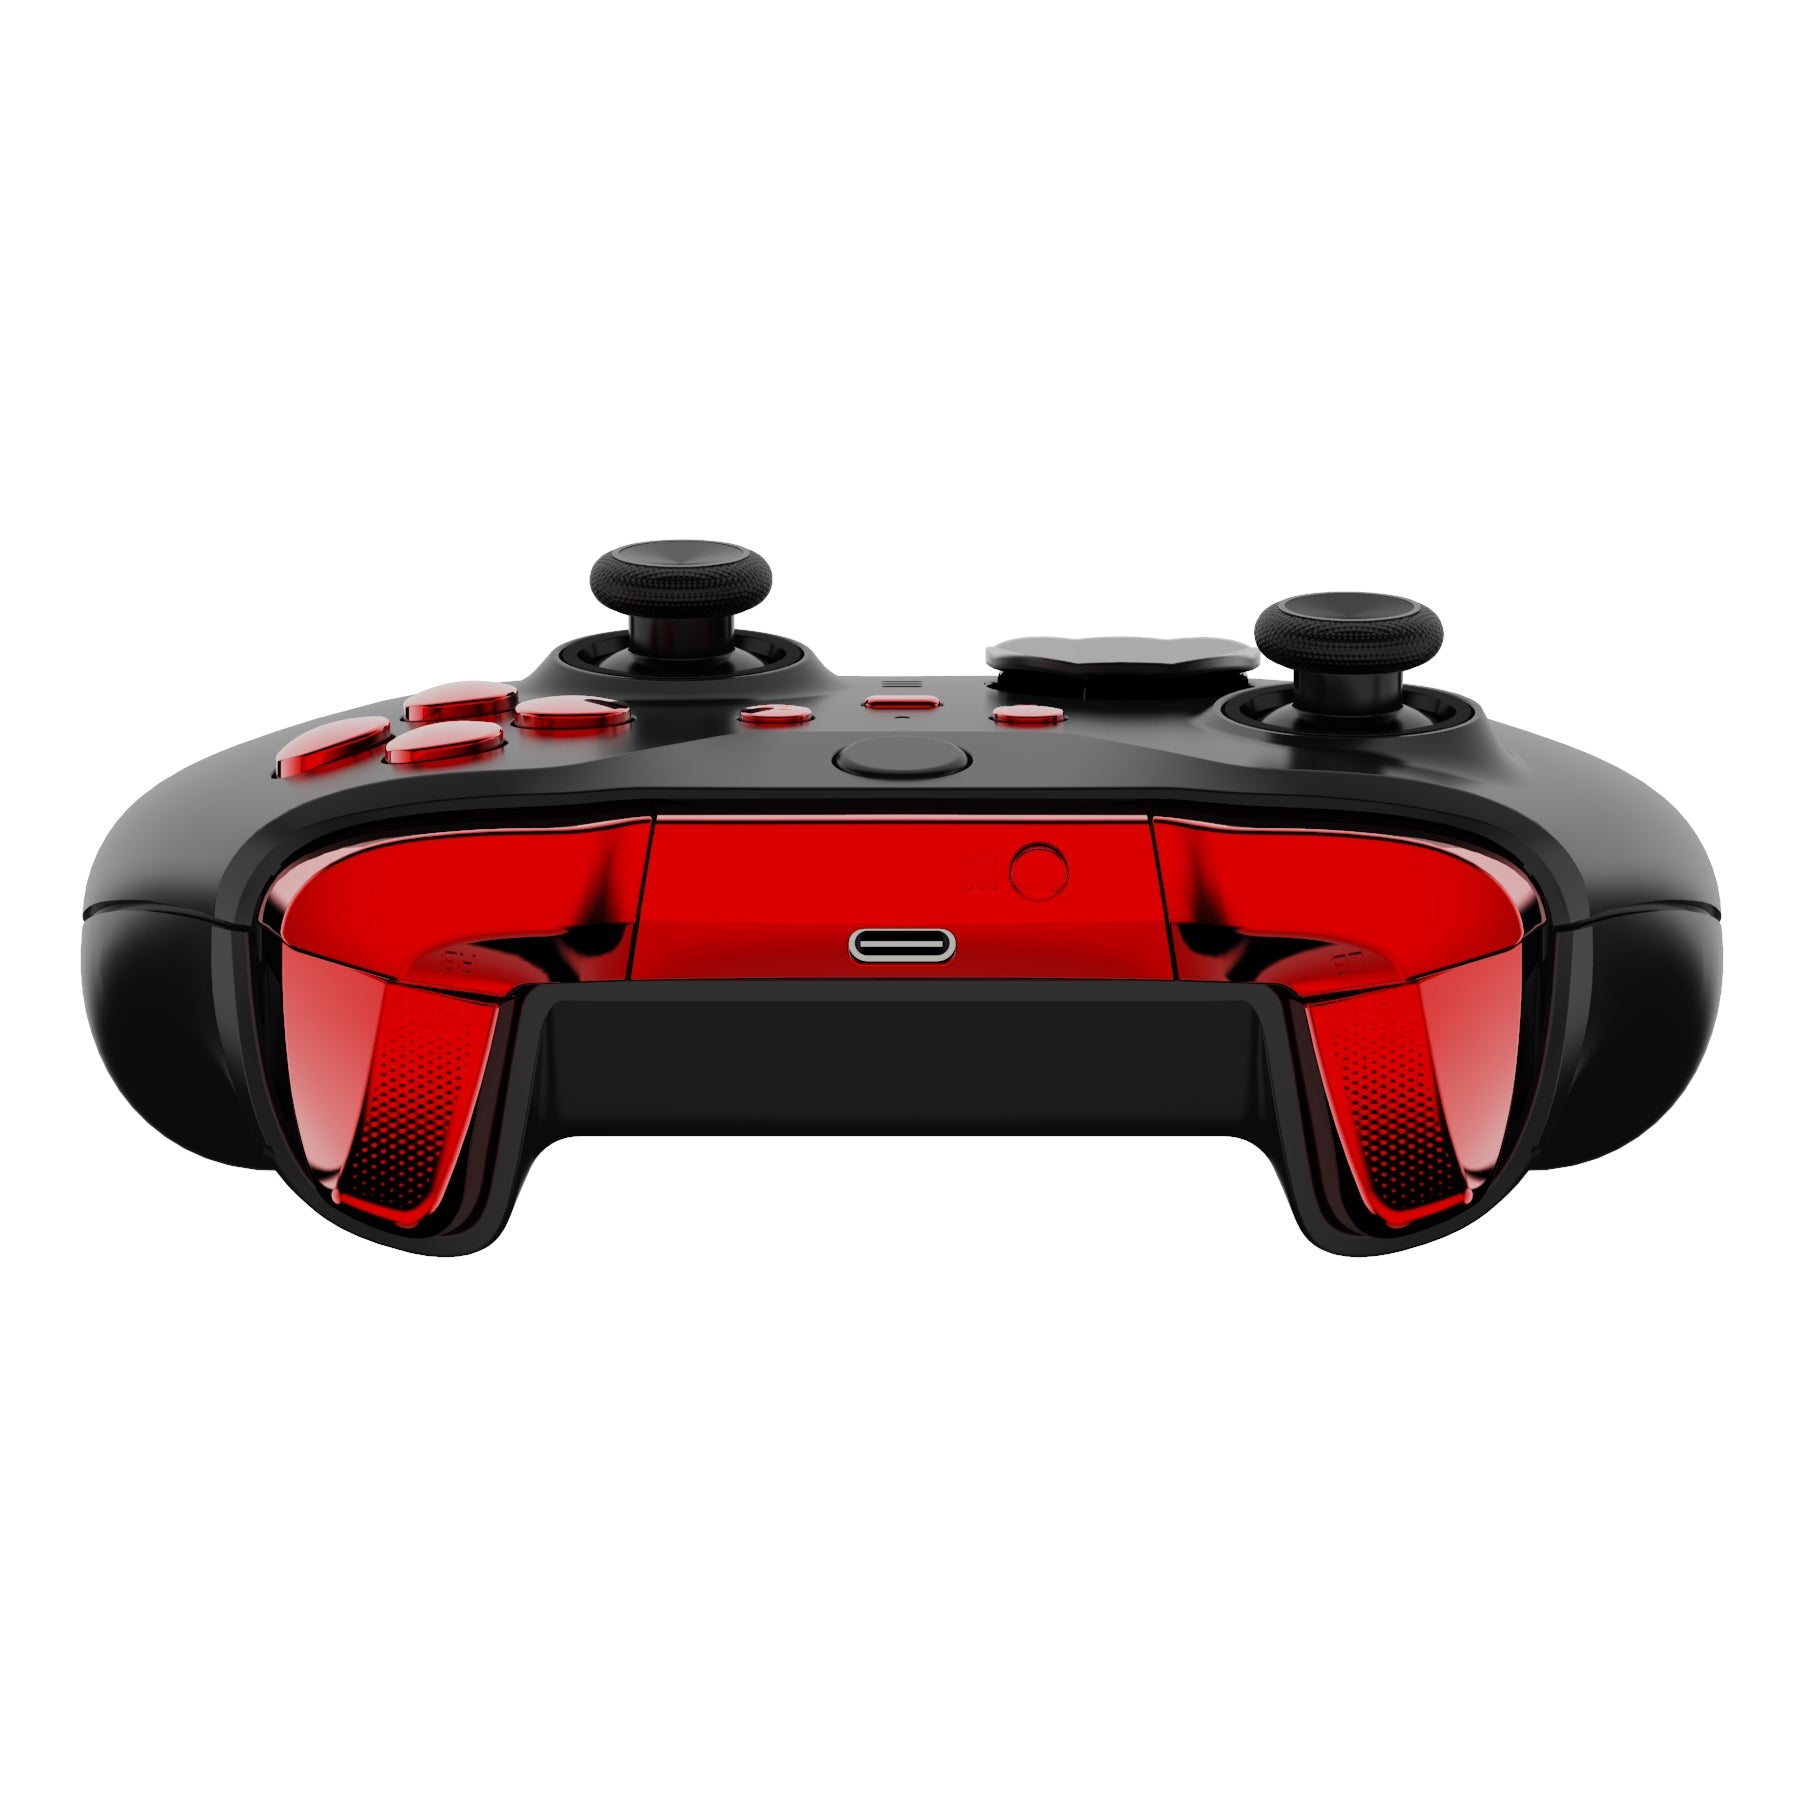 eXtremeRate Retail Chrome Red Replacement Buttons for Xbox One Elite Series 2 Controller, LB RB LT RT Bumpers Triggers ABXY Start Back Sync Profile Switch Keys for Xbox One Elite V2 Controller (Model 1797 and Core Model 1797) - IL203